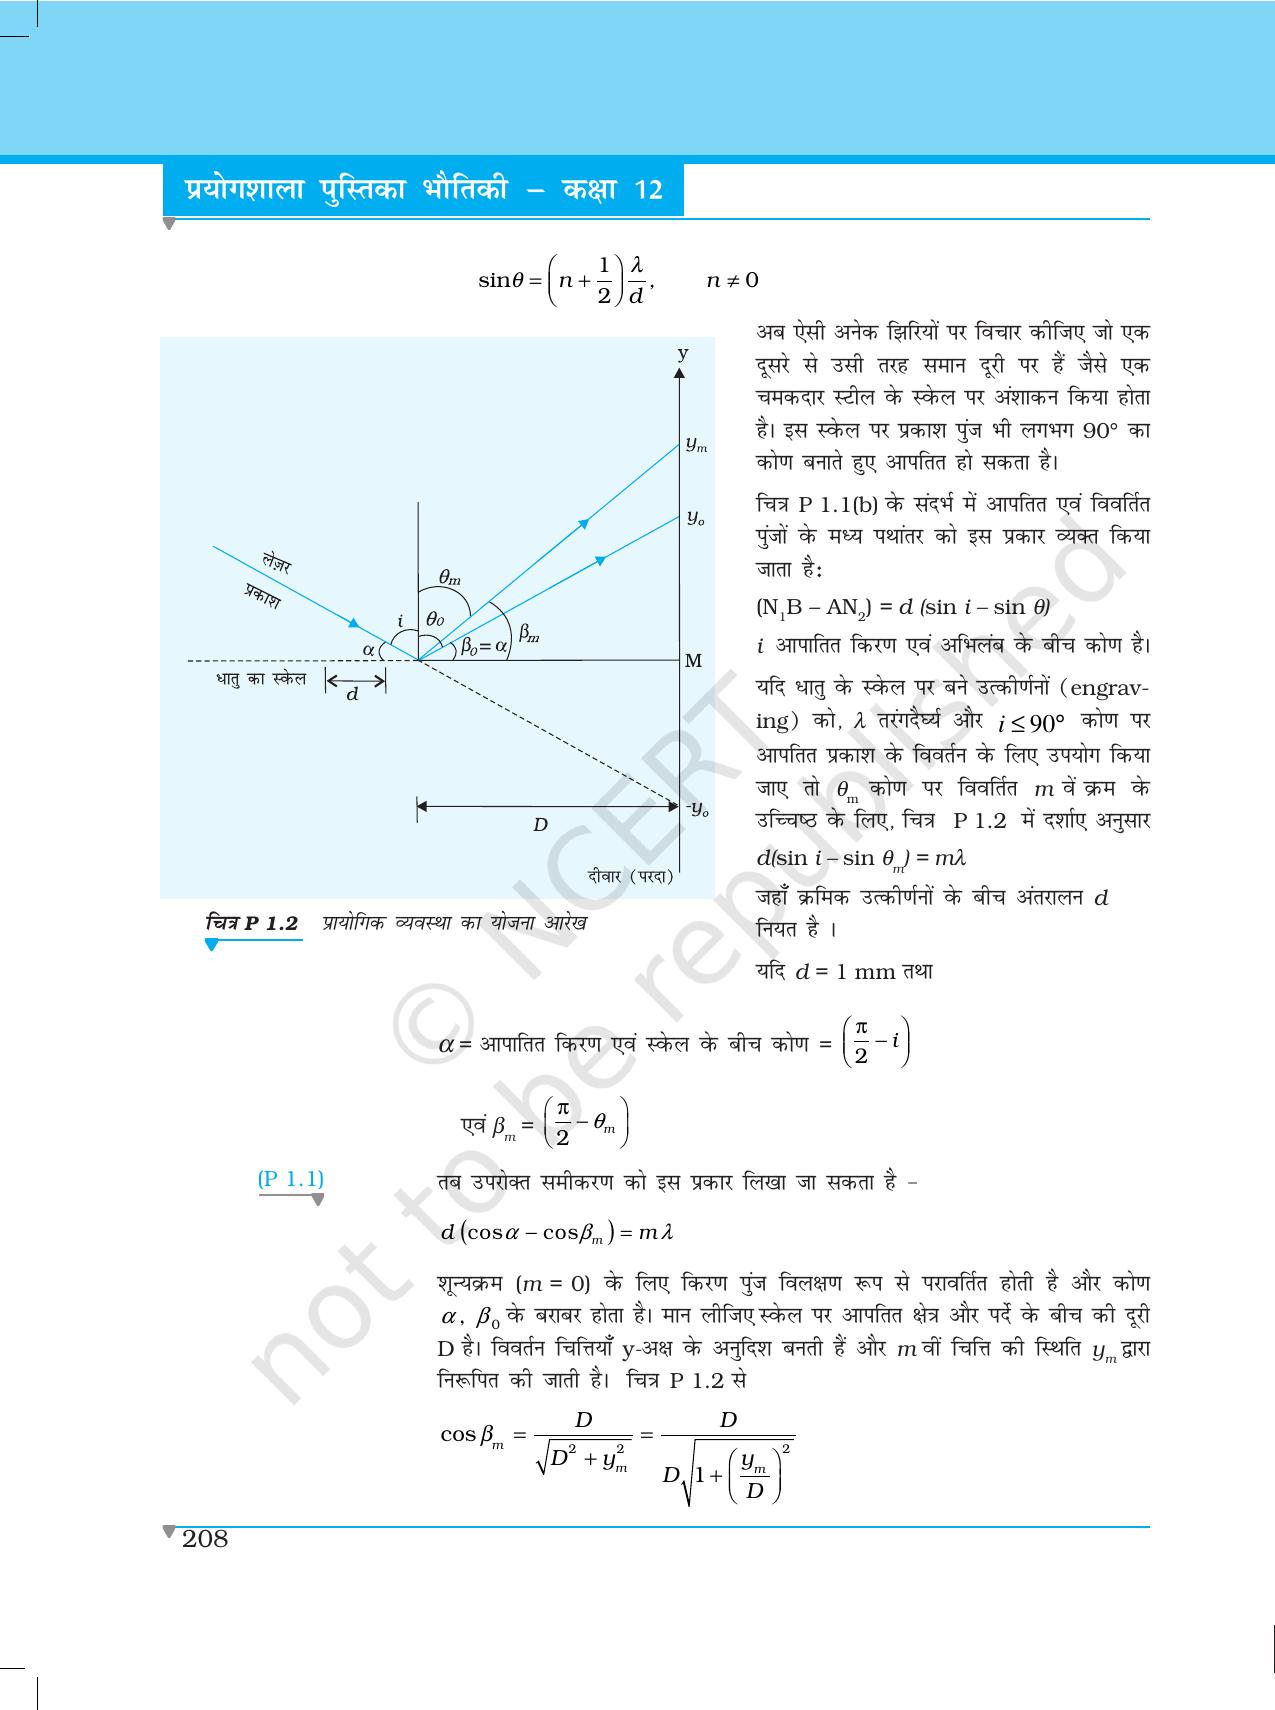 NCERT Laboratory Manuals for Class XII भौतिकी - परियोजना (1 - 7) - Page 2